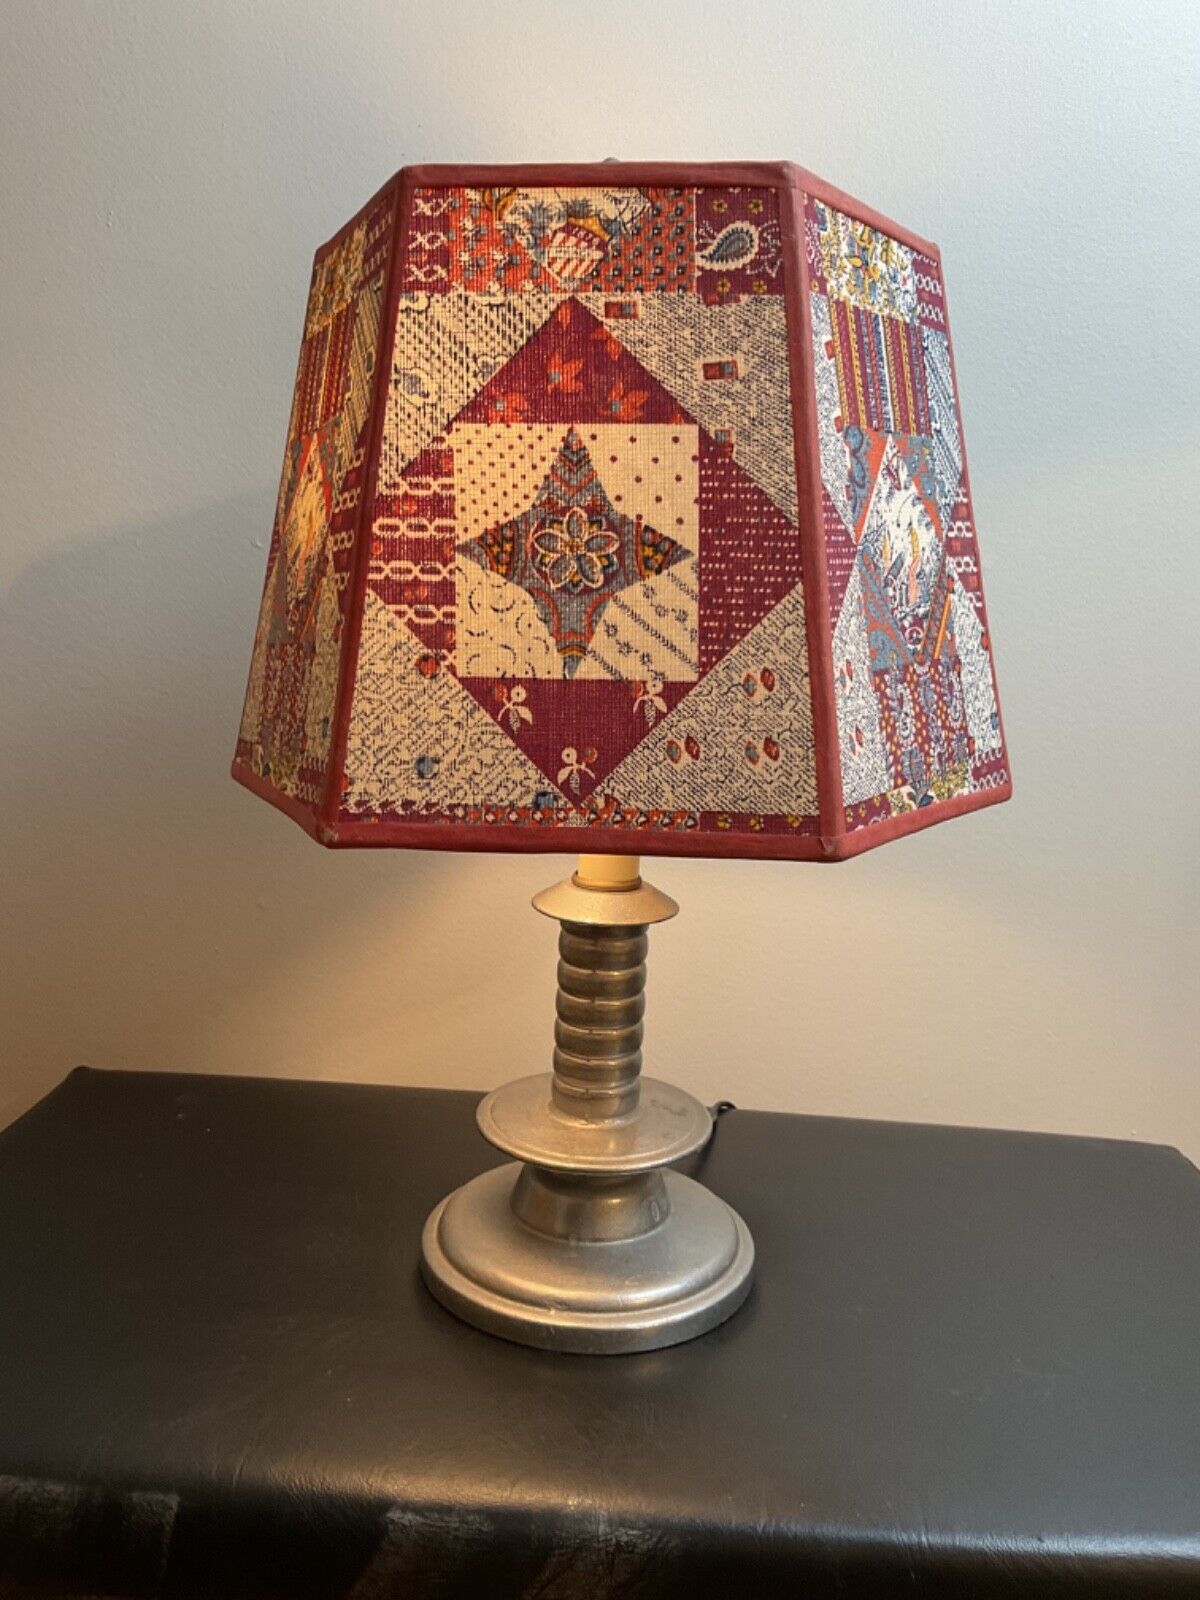 VTG Wilton Columbia PA Pewter Desk Table Lamp with Americana Fabric Shade